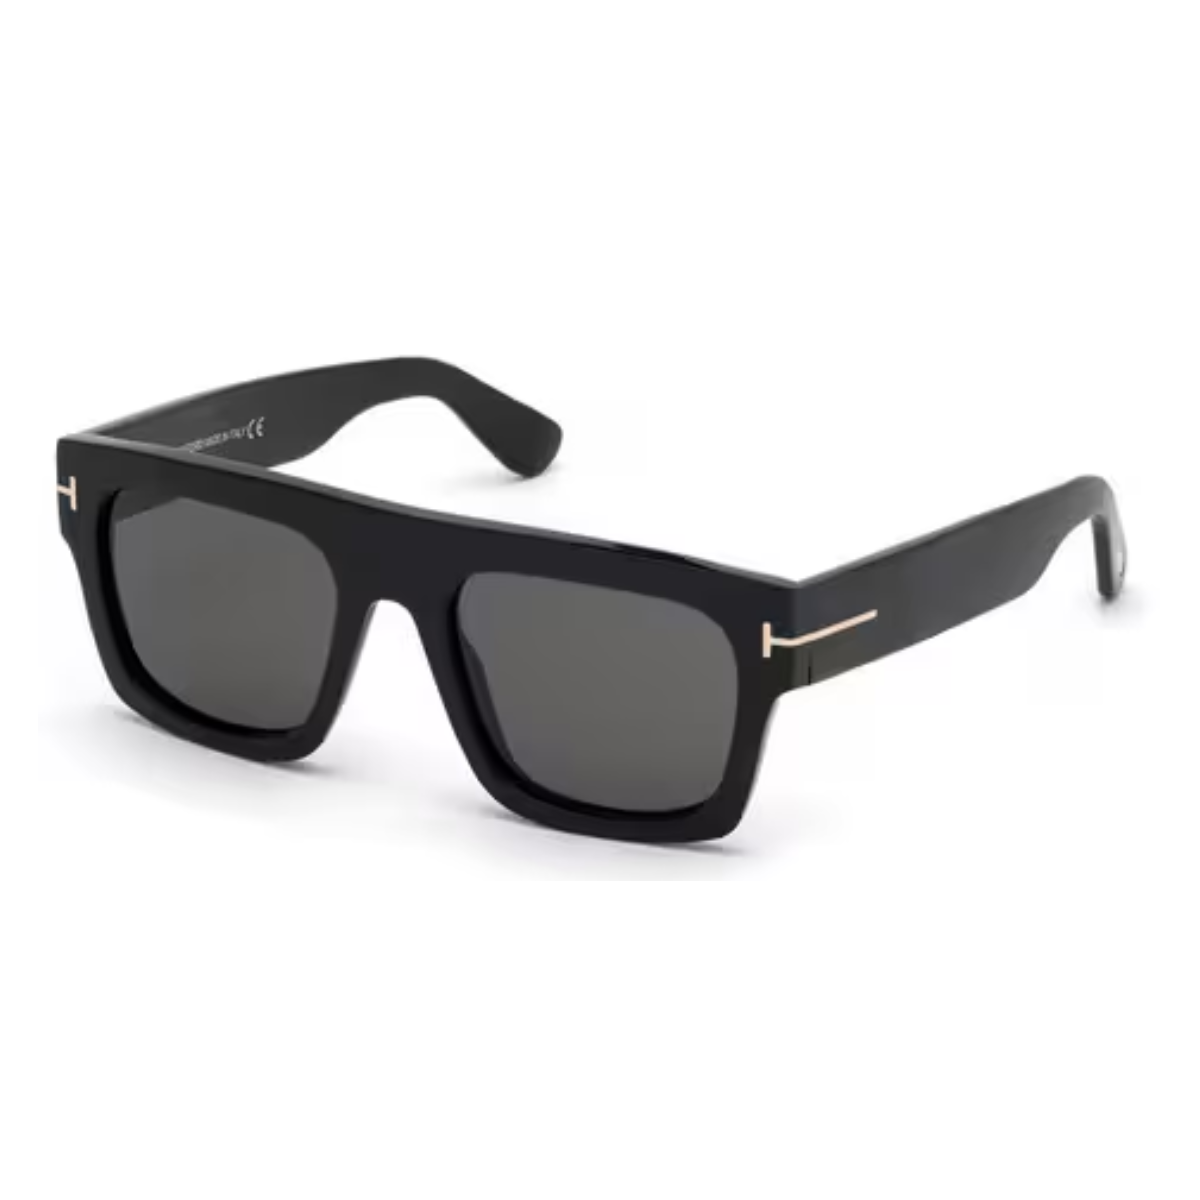 "Front view of Tom Ford 711 sunglasses featuring a square red frame with light pink lenses, showcasing the elegant design suitable for both men and women."